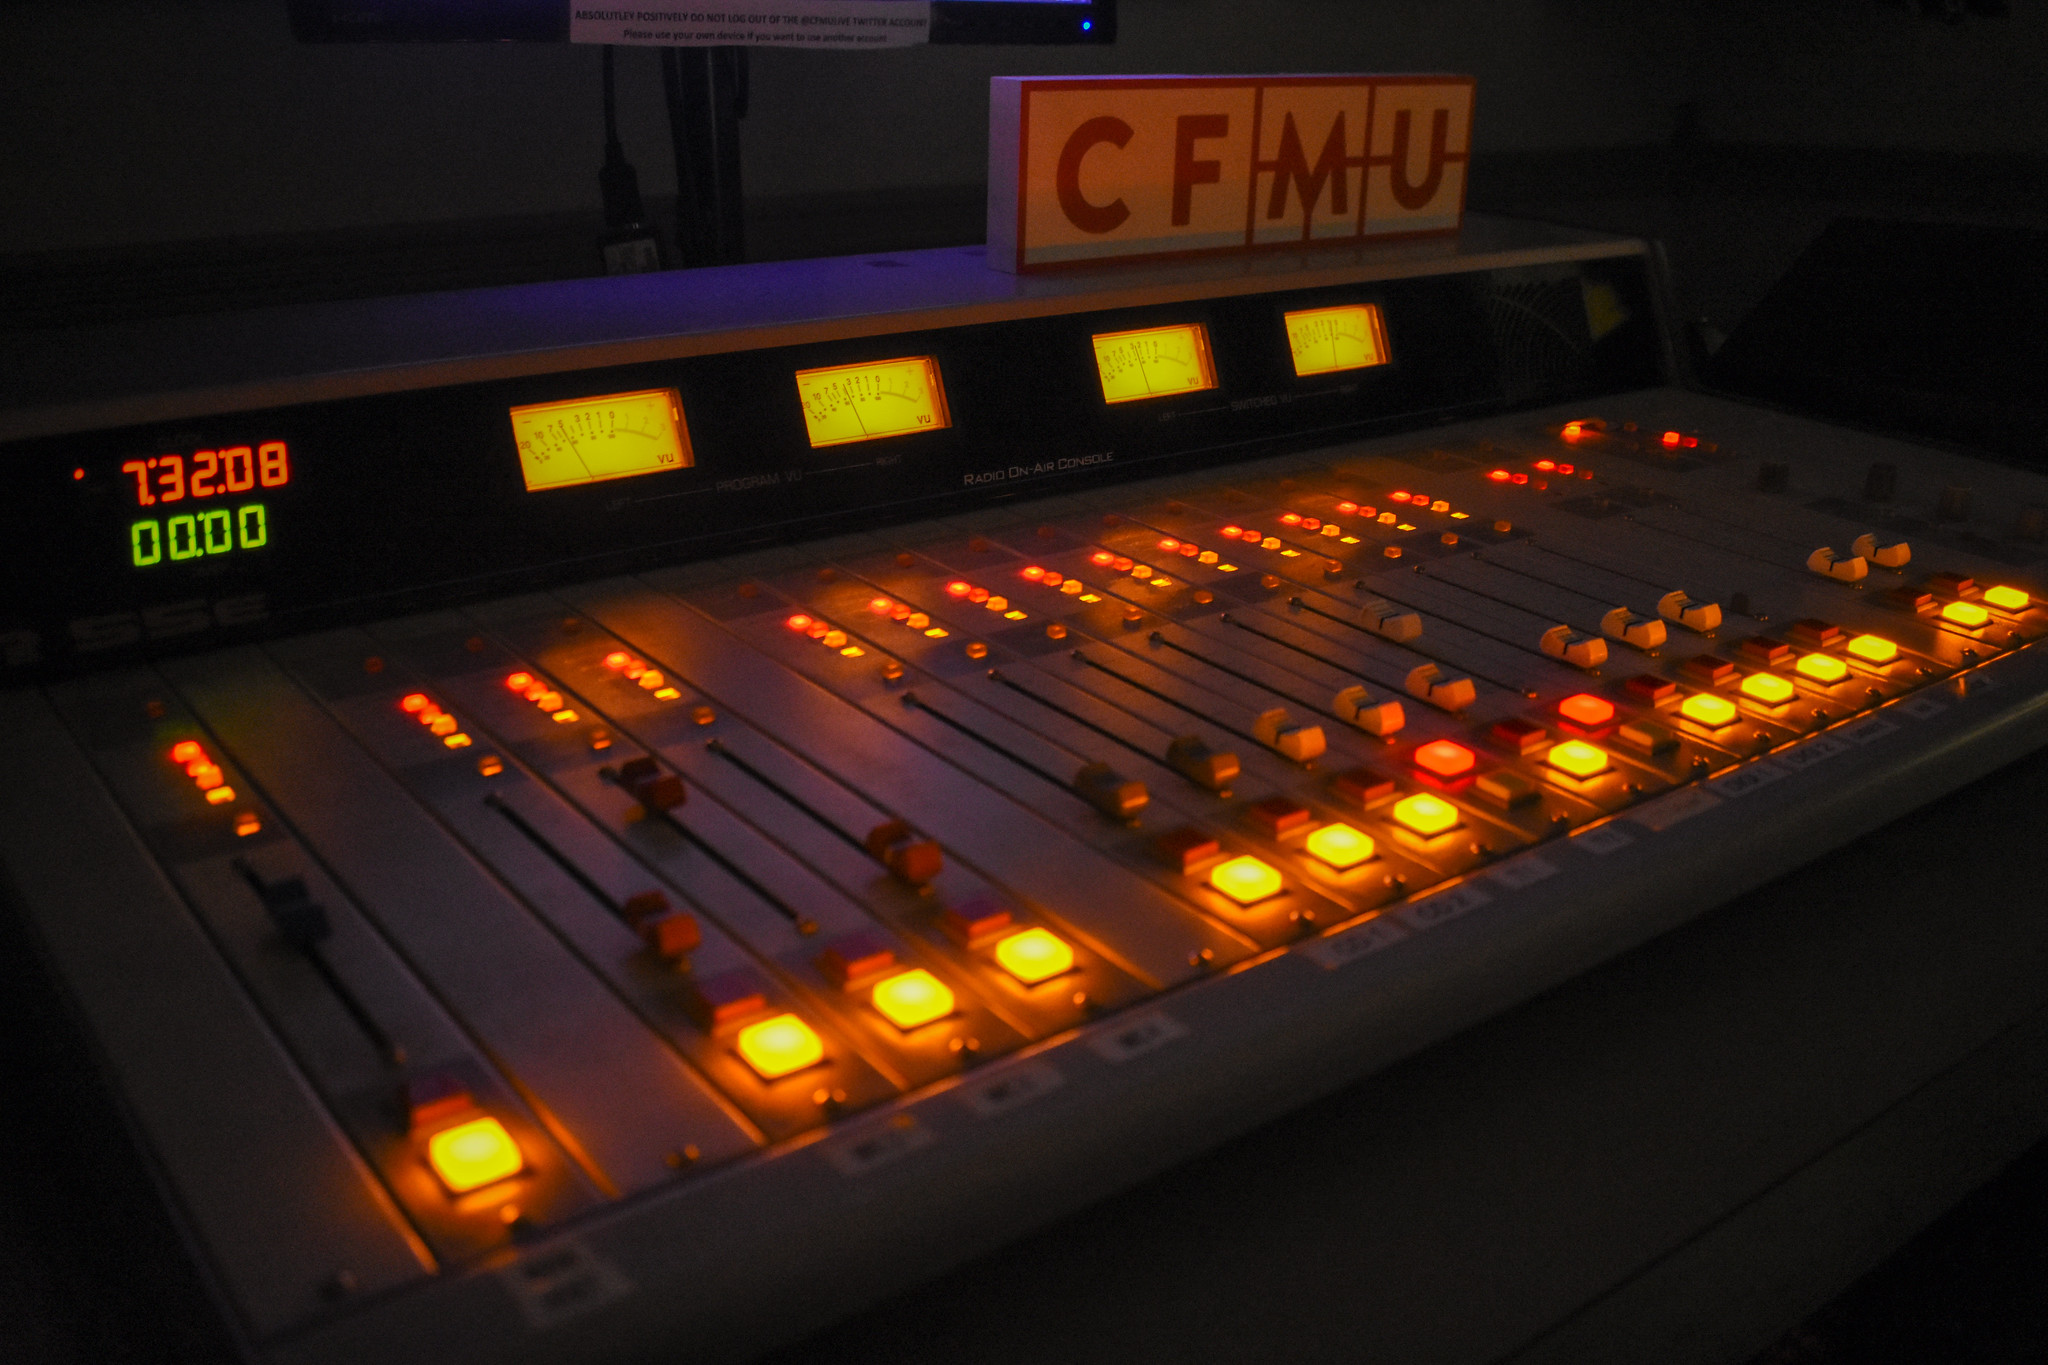 A radio station control board showing the dials glowing in a dark room